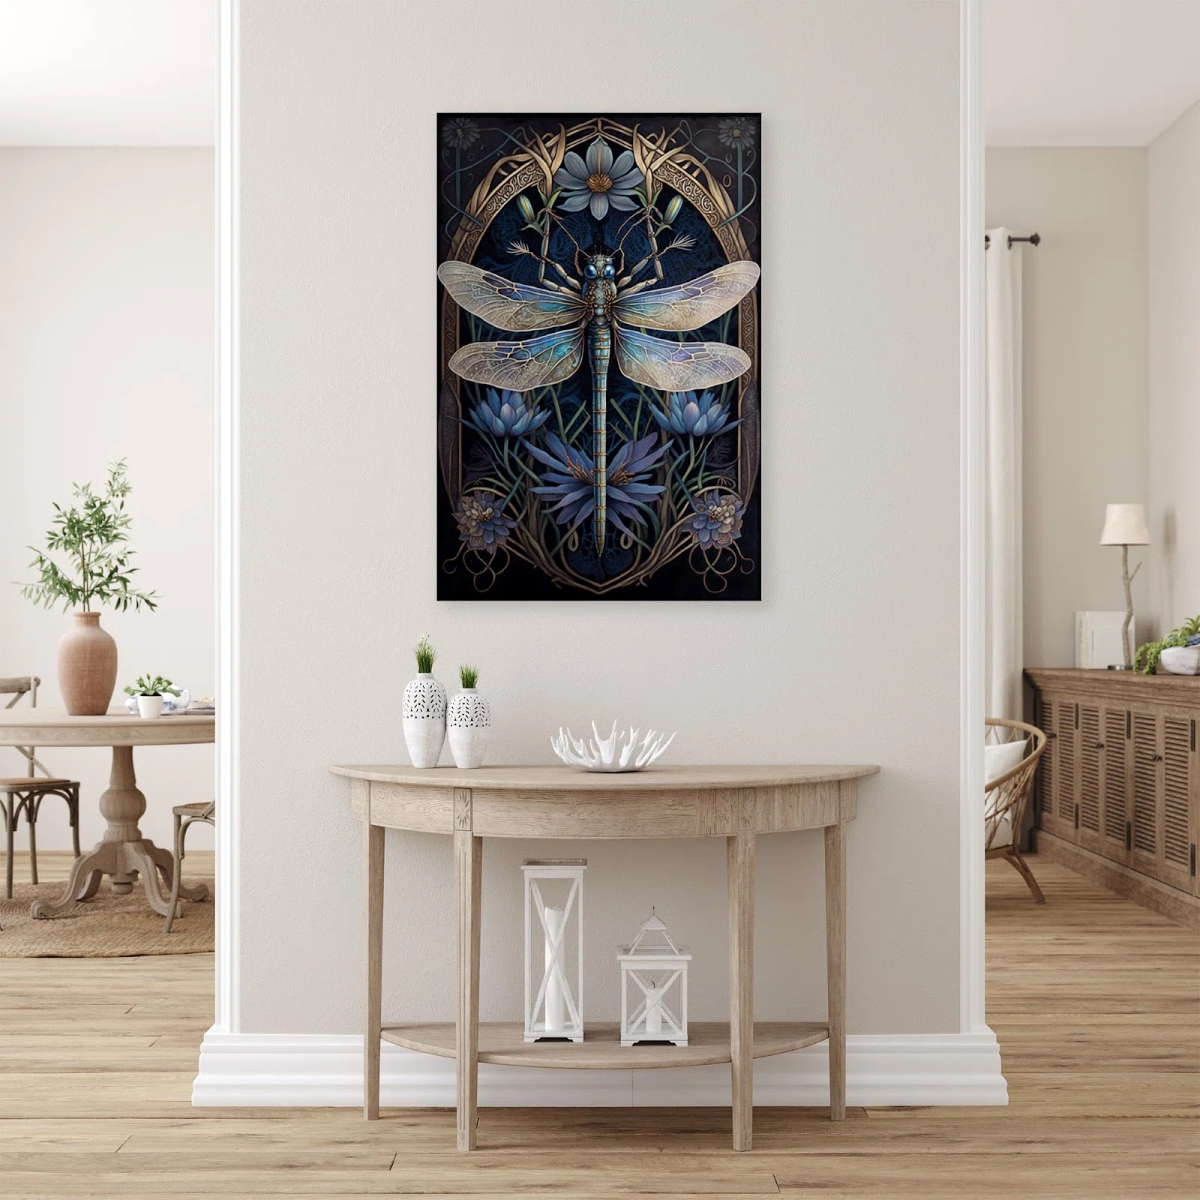 Large dragonfly art hanging on wall.